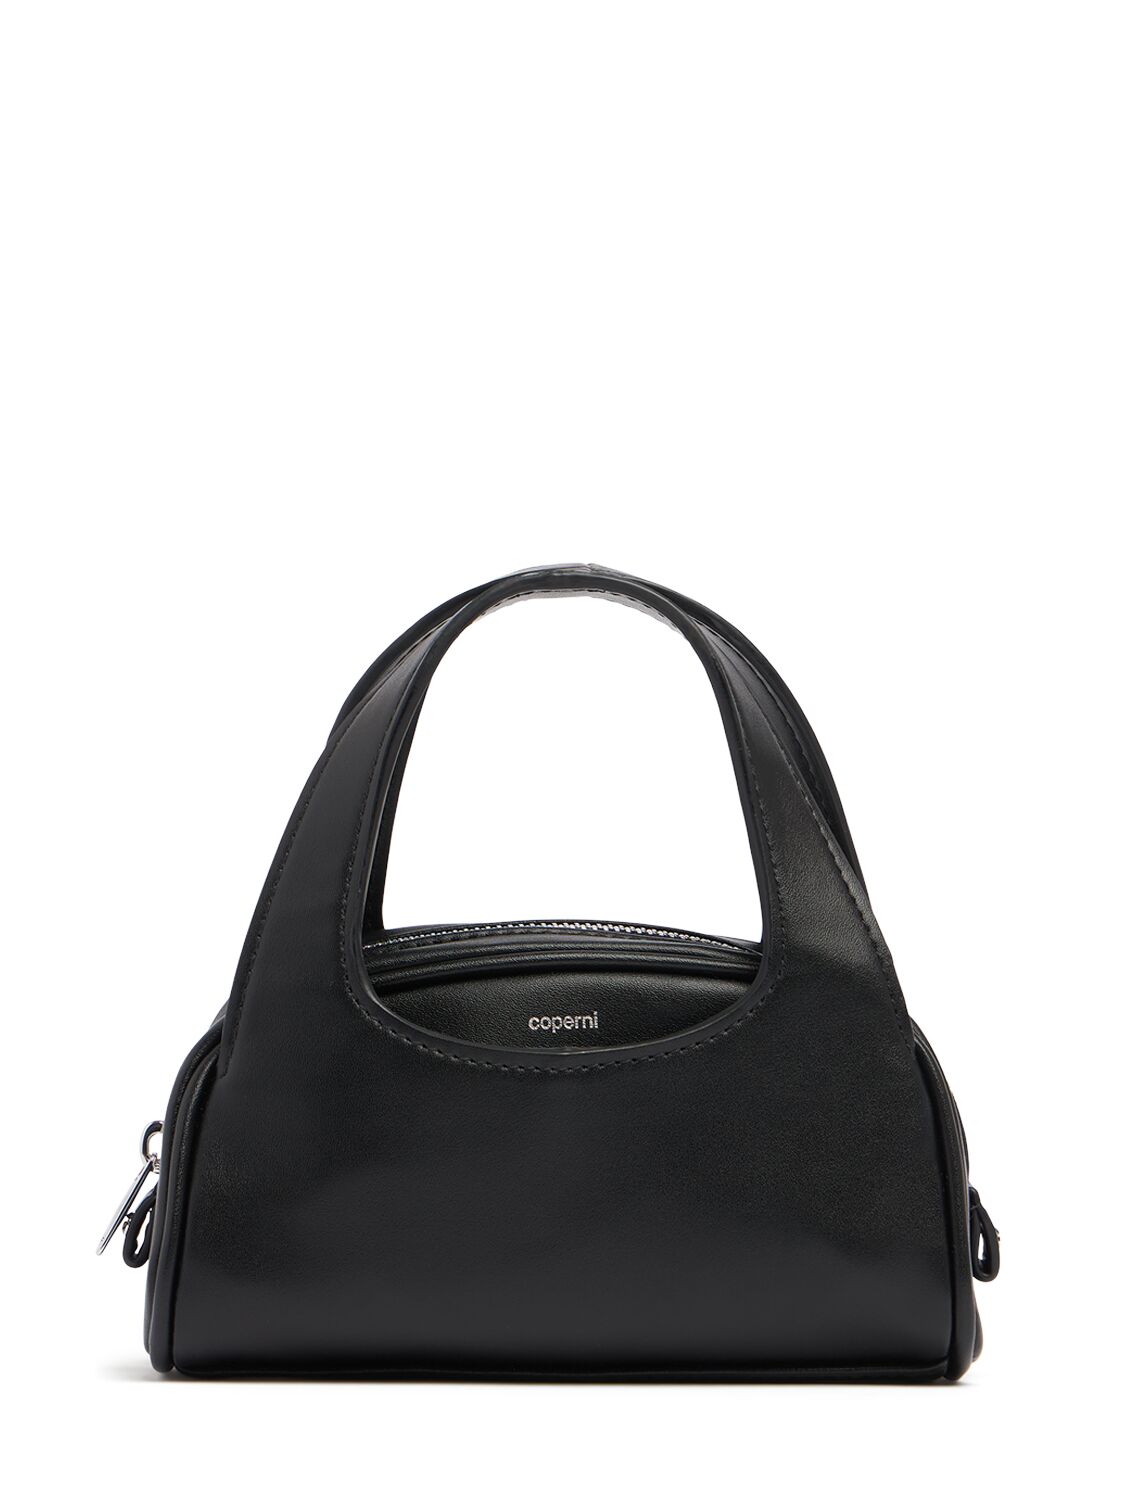 Coperni Small Faux Leather Top Handle Bag In Black